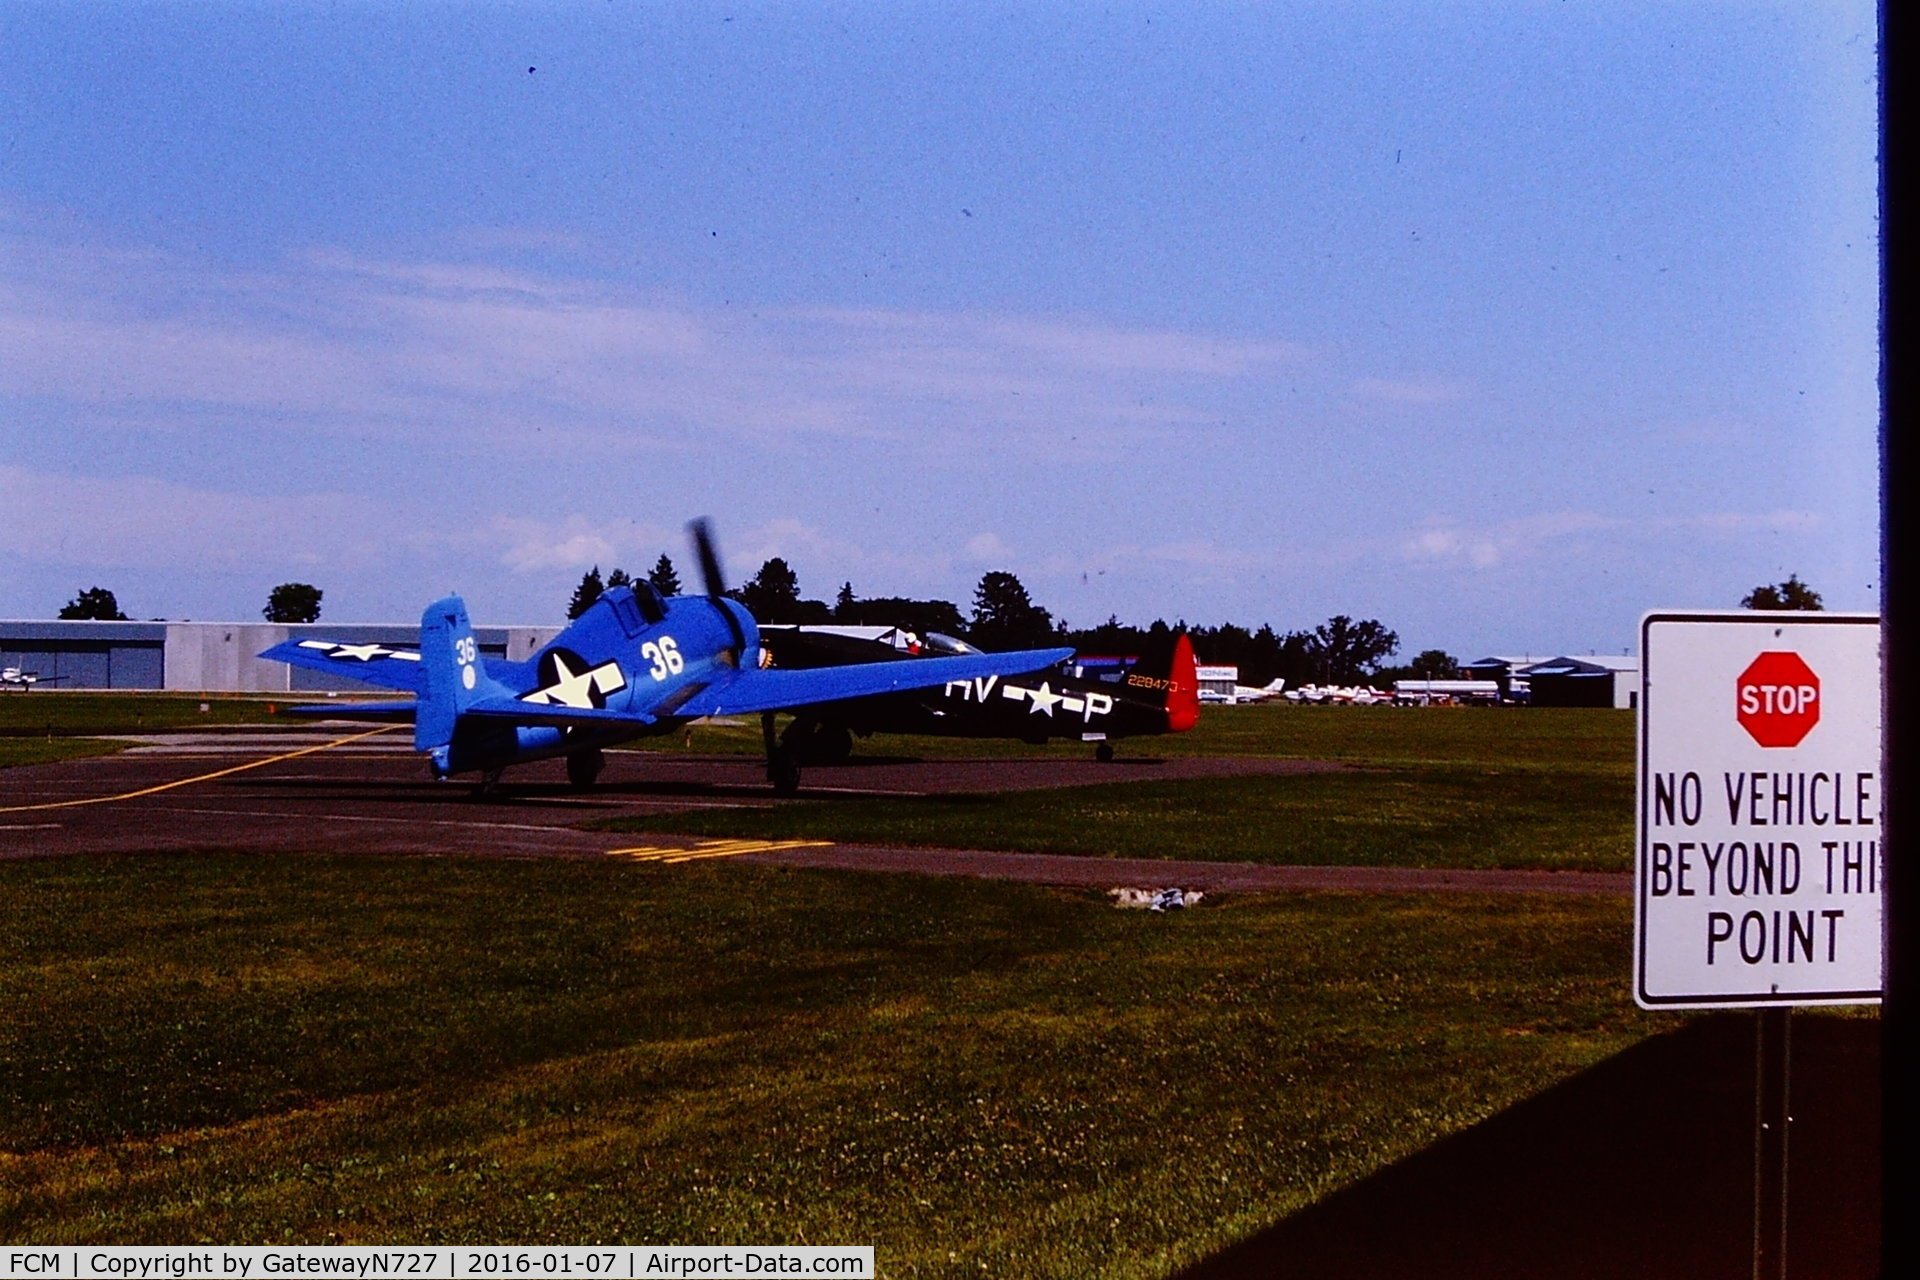 Flying Cloud Airport (FCM) - Summer, 1986.